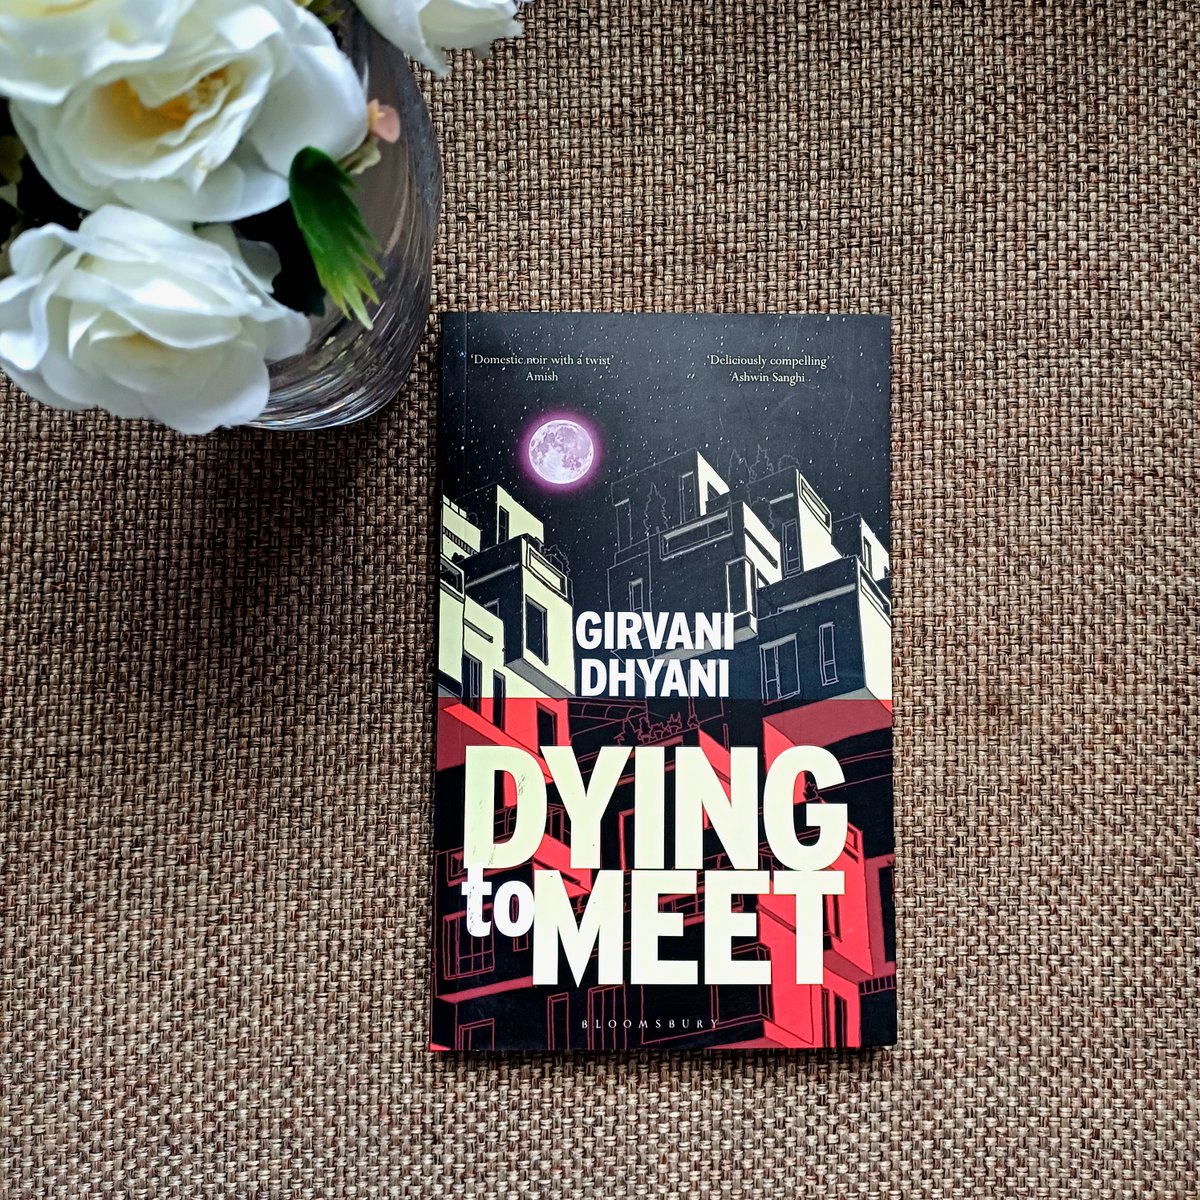 🔍 Dive into a weekend reunion turned deadly in #DyingToMeet. When old friends reunite, buried secrets resurface and tensions escalate. But when tragedy strikes, Maya finds herself caught in a chilling mystery. Can she uncover the truth before it's too late? 💀 📚